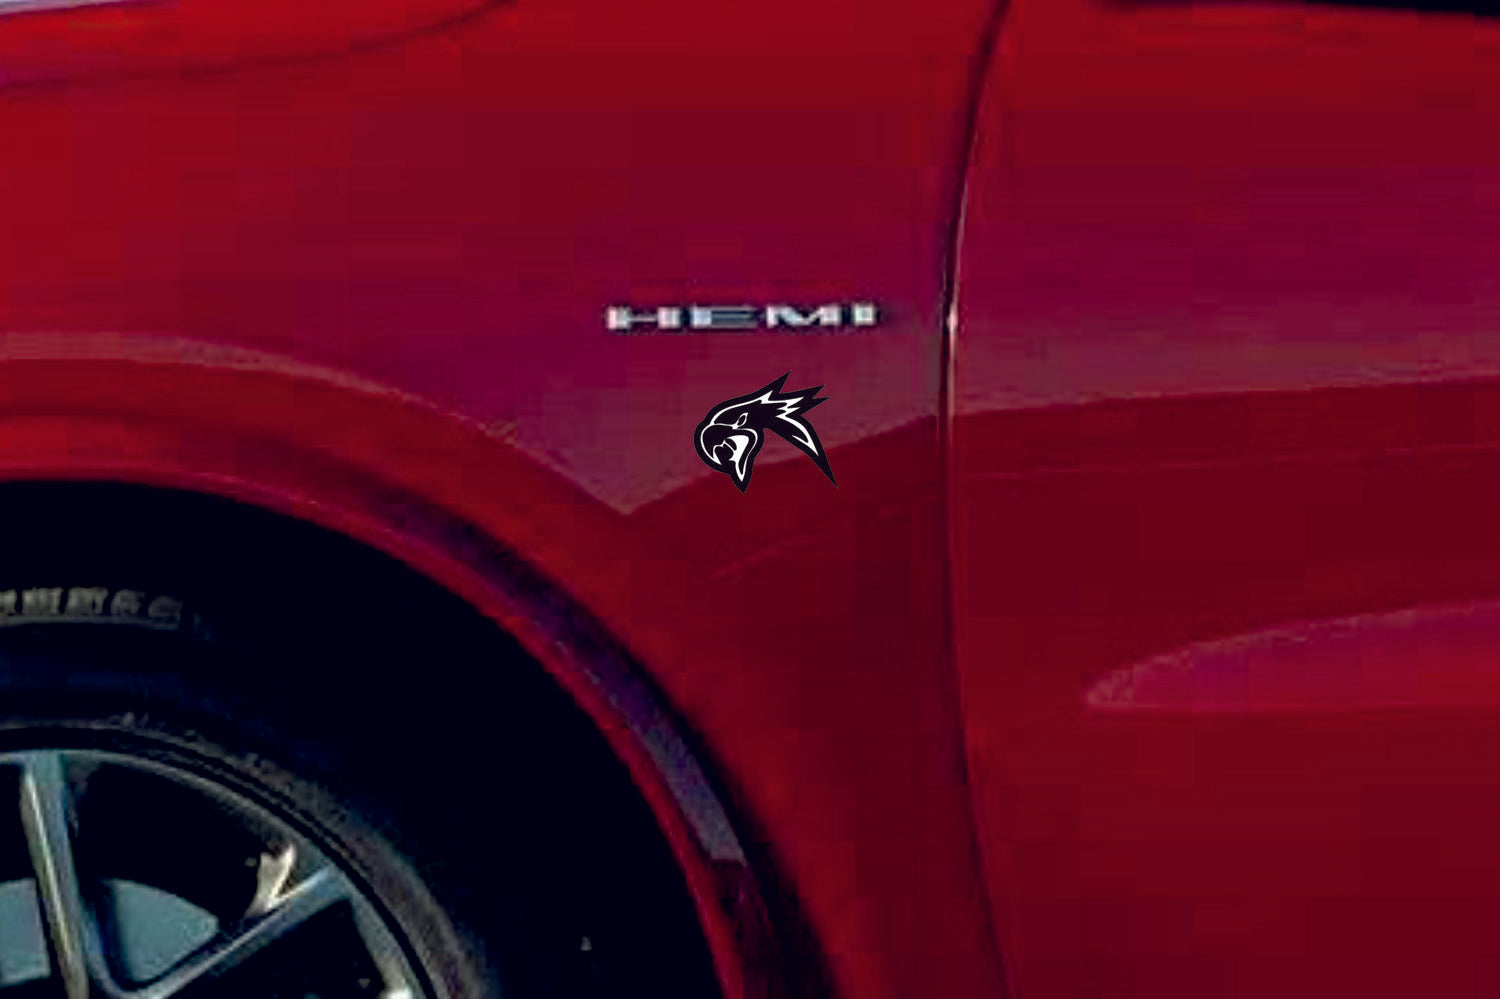 Jeep emblem for fenders with Trackhawk logo (head)